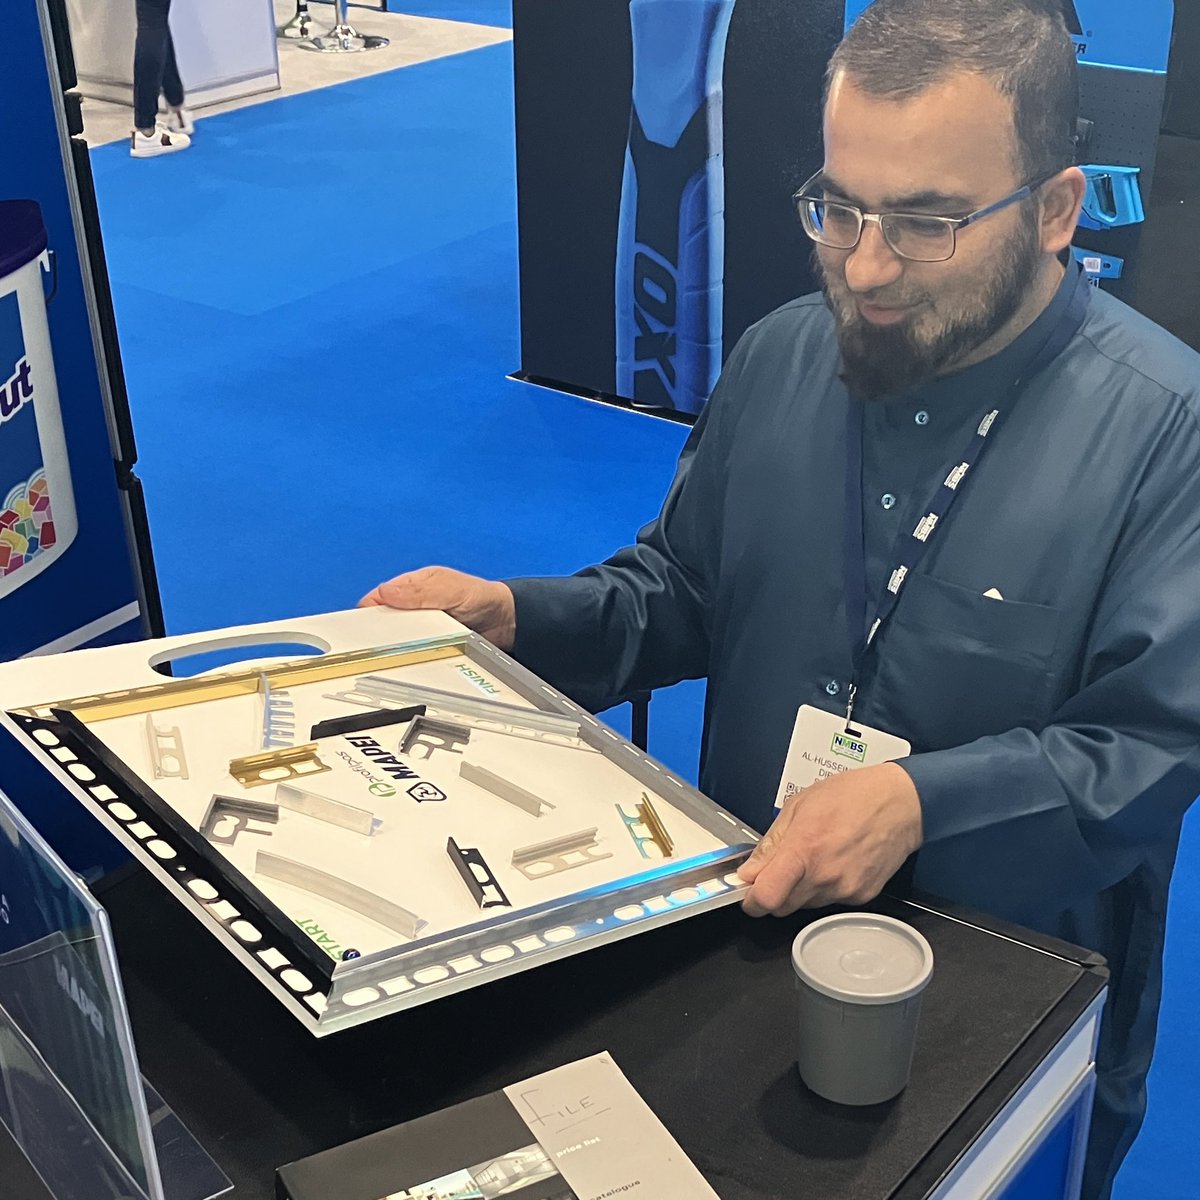 Whilst visiting us on Stand 125 at @NationalMerch #trade #exhibition, why not have a go on our #Mapei Maze Runner game? Guide a marble through our challenging maze of @profilpasuk #profiles for a chance to win a @sassuolocalcio #football shirt. Good luck! #NMBS #NMBSExhibition24